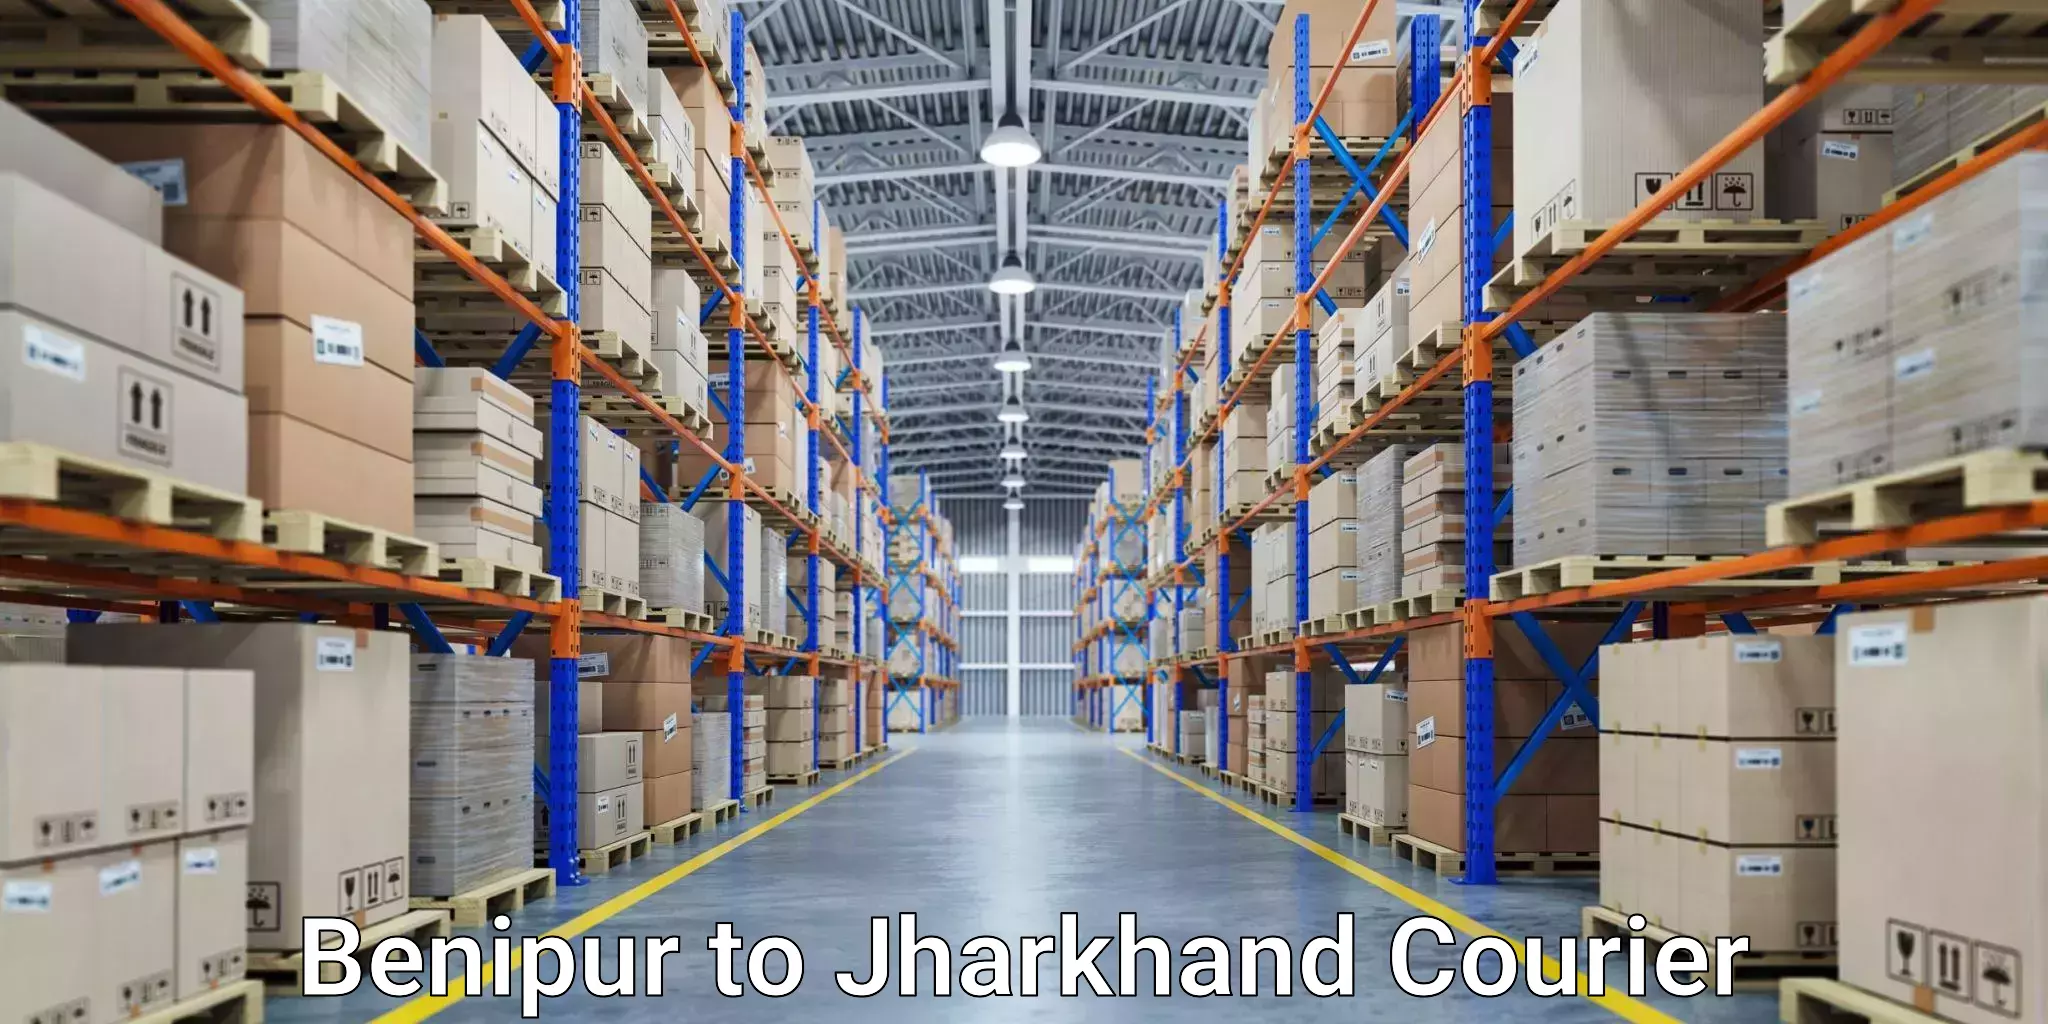 Business shipping needs Benipur to Jamshedpur